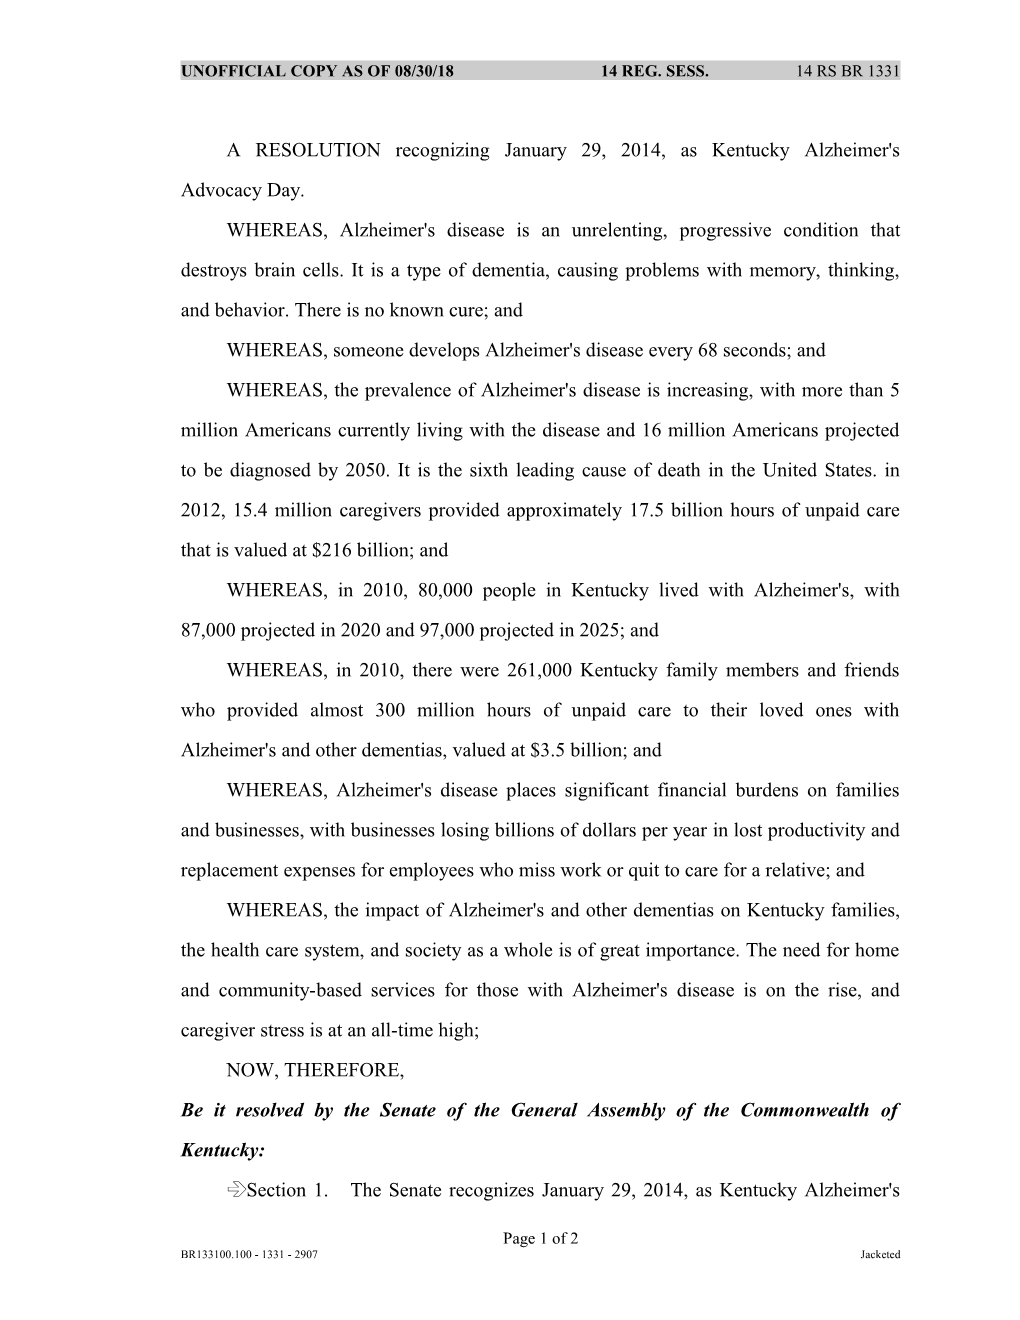 A RESOLUTION Recognizing January 29, 2014, As Kentucky Alzheimer's Advocacy Day